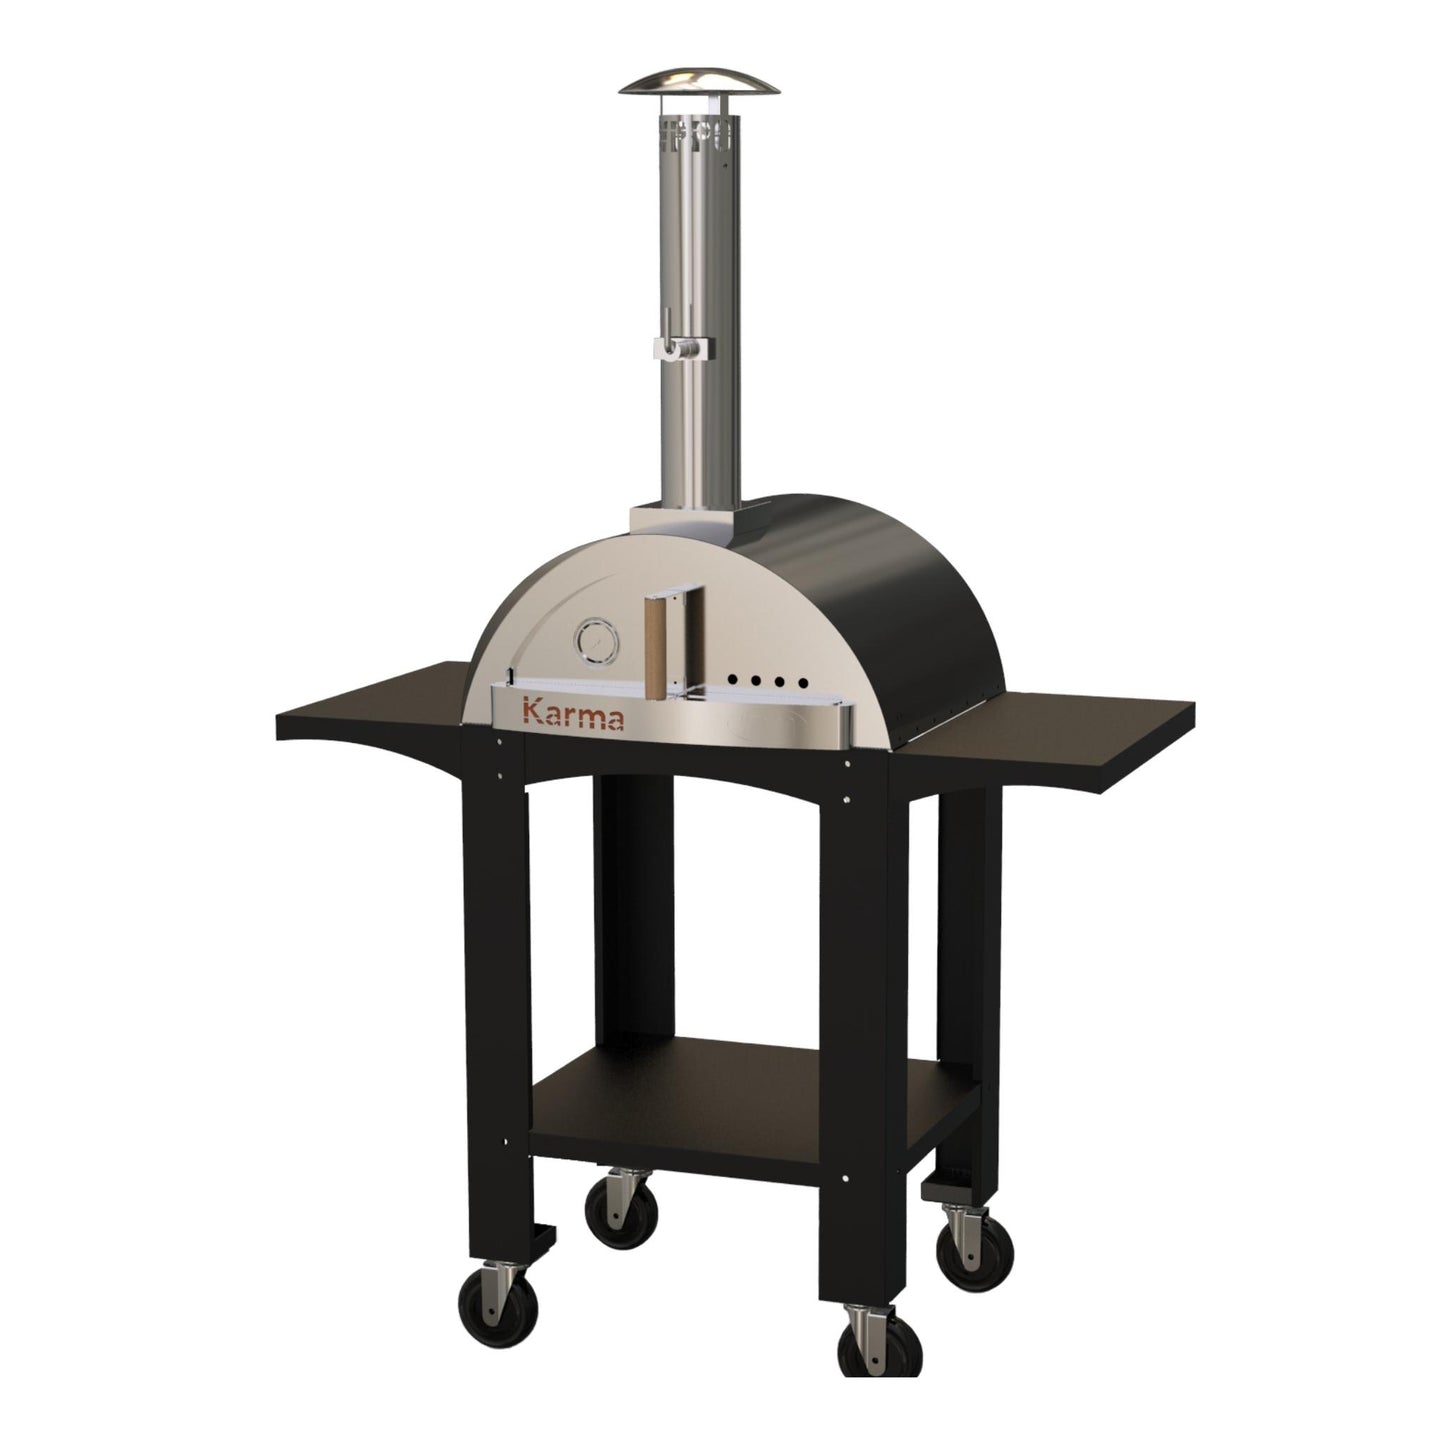 
                  
                    Wood Fired Pizza Oven, Karma 25 - Colored ovens with stand. - WPPO LLC Direct
                  
                